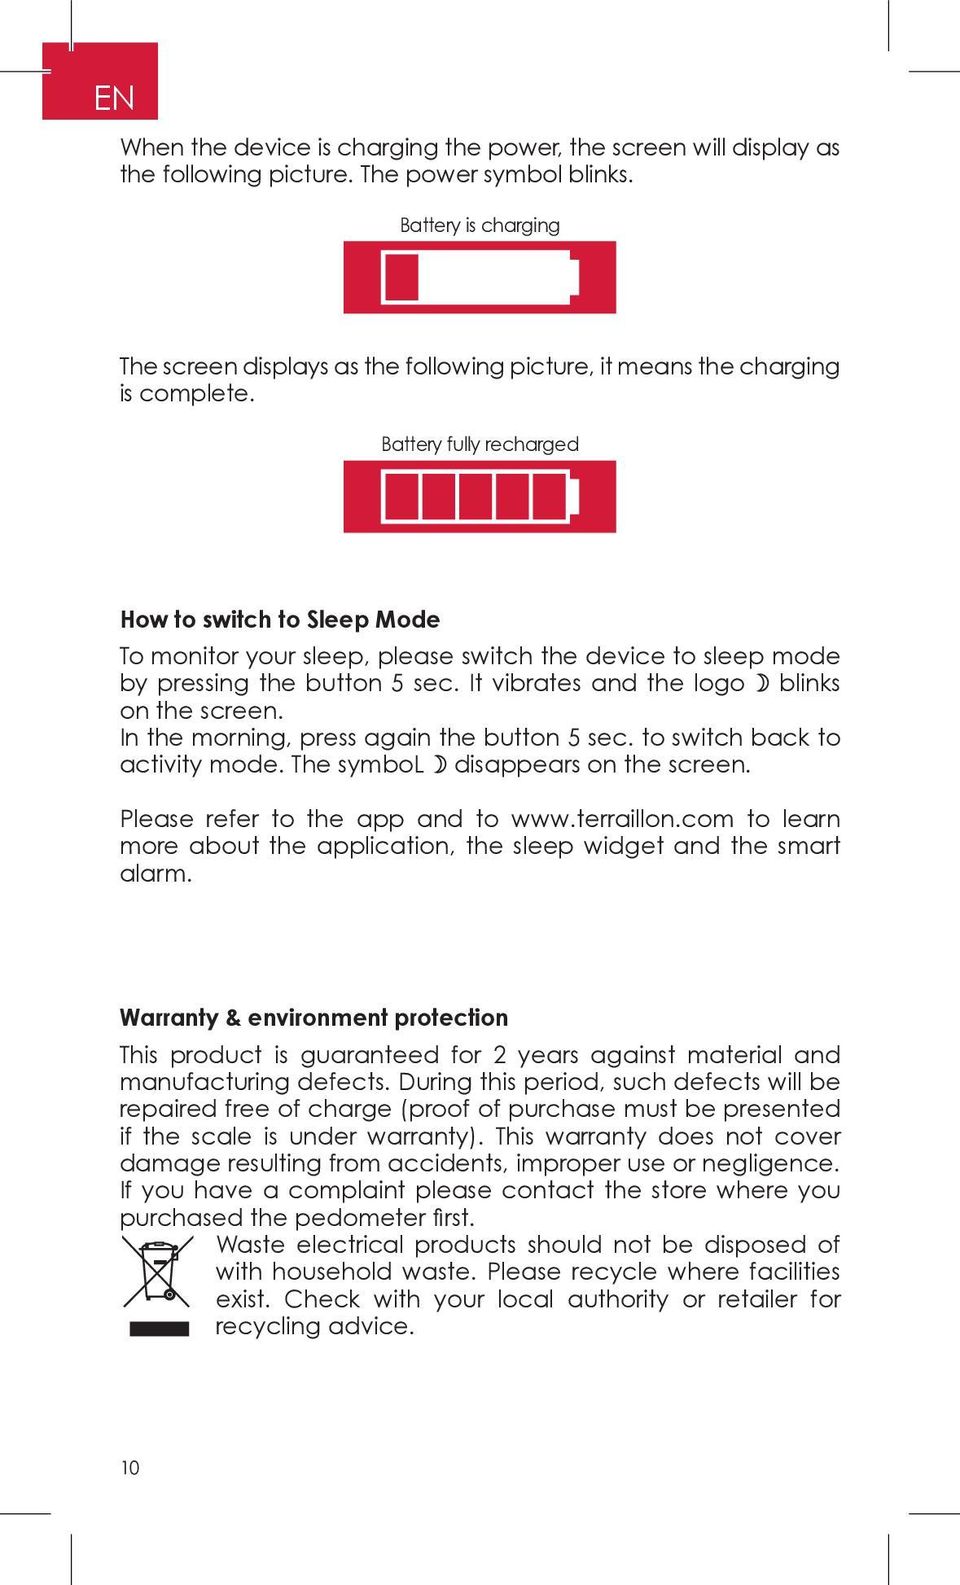 Battery fully recharged How to switch to Sleep Mode To monitor your sleep, please switch the device to sleep mode by pressing the button 5 sec. It vibrates and the logo blinks on the screen.